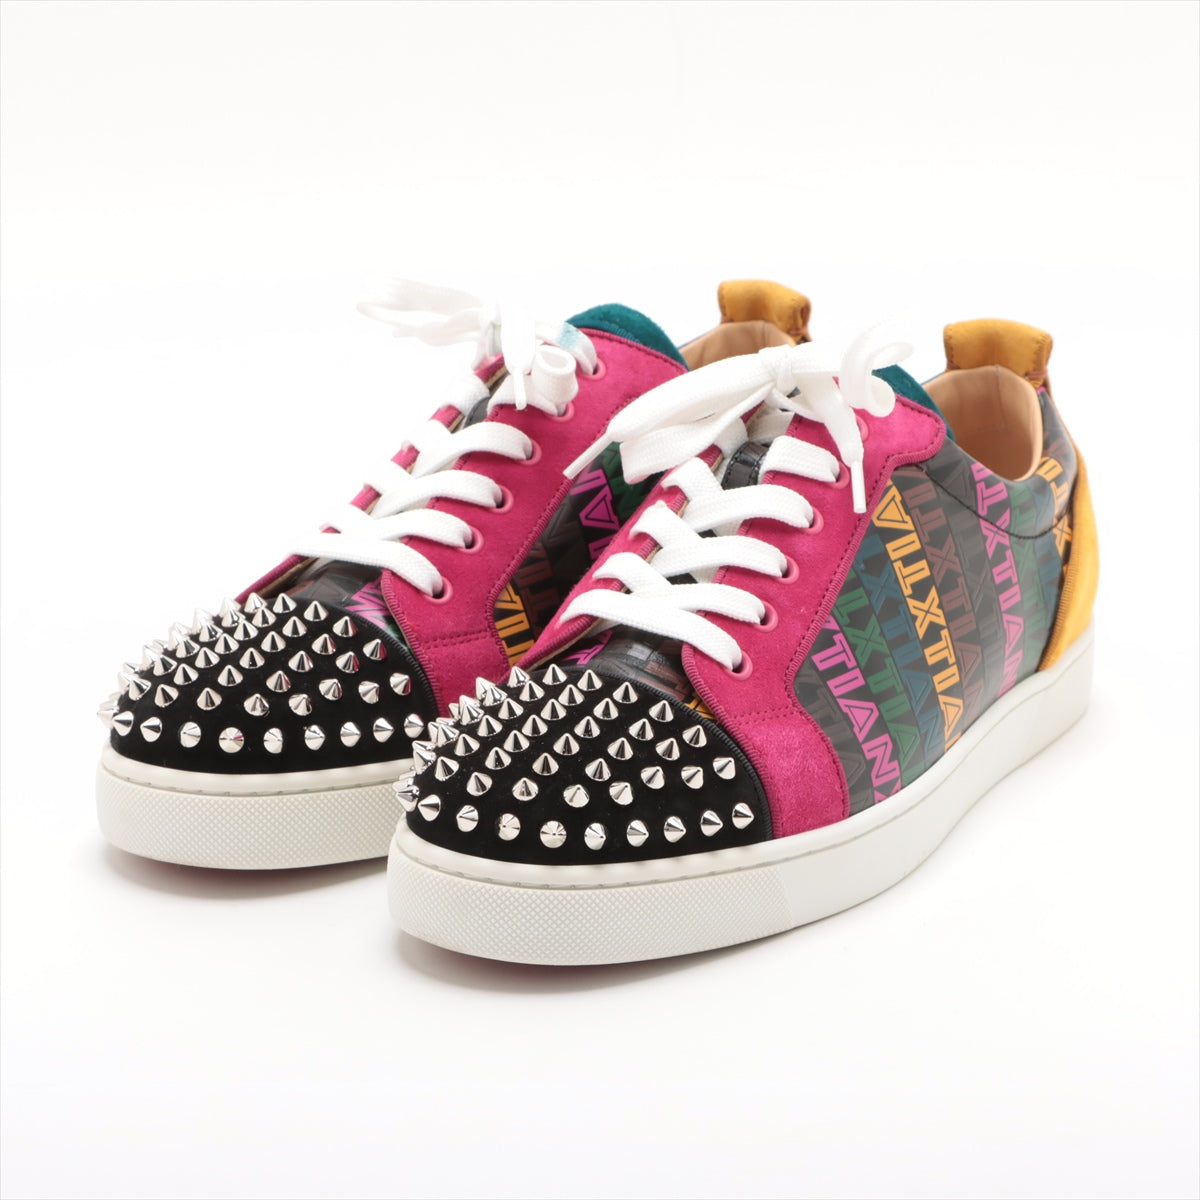 Christian Louboutin Leather & Suede Sneakers 42 1/2 Men's Multicolor LOUIS JUNIOR SPIKES ORLATO Spike Studs Is there a replacement string